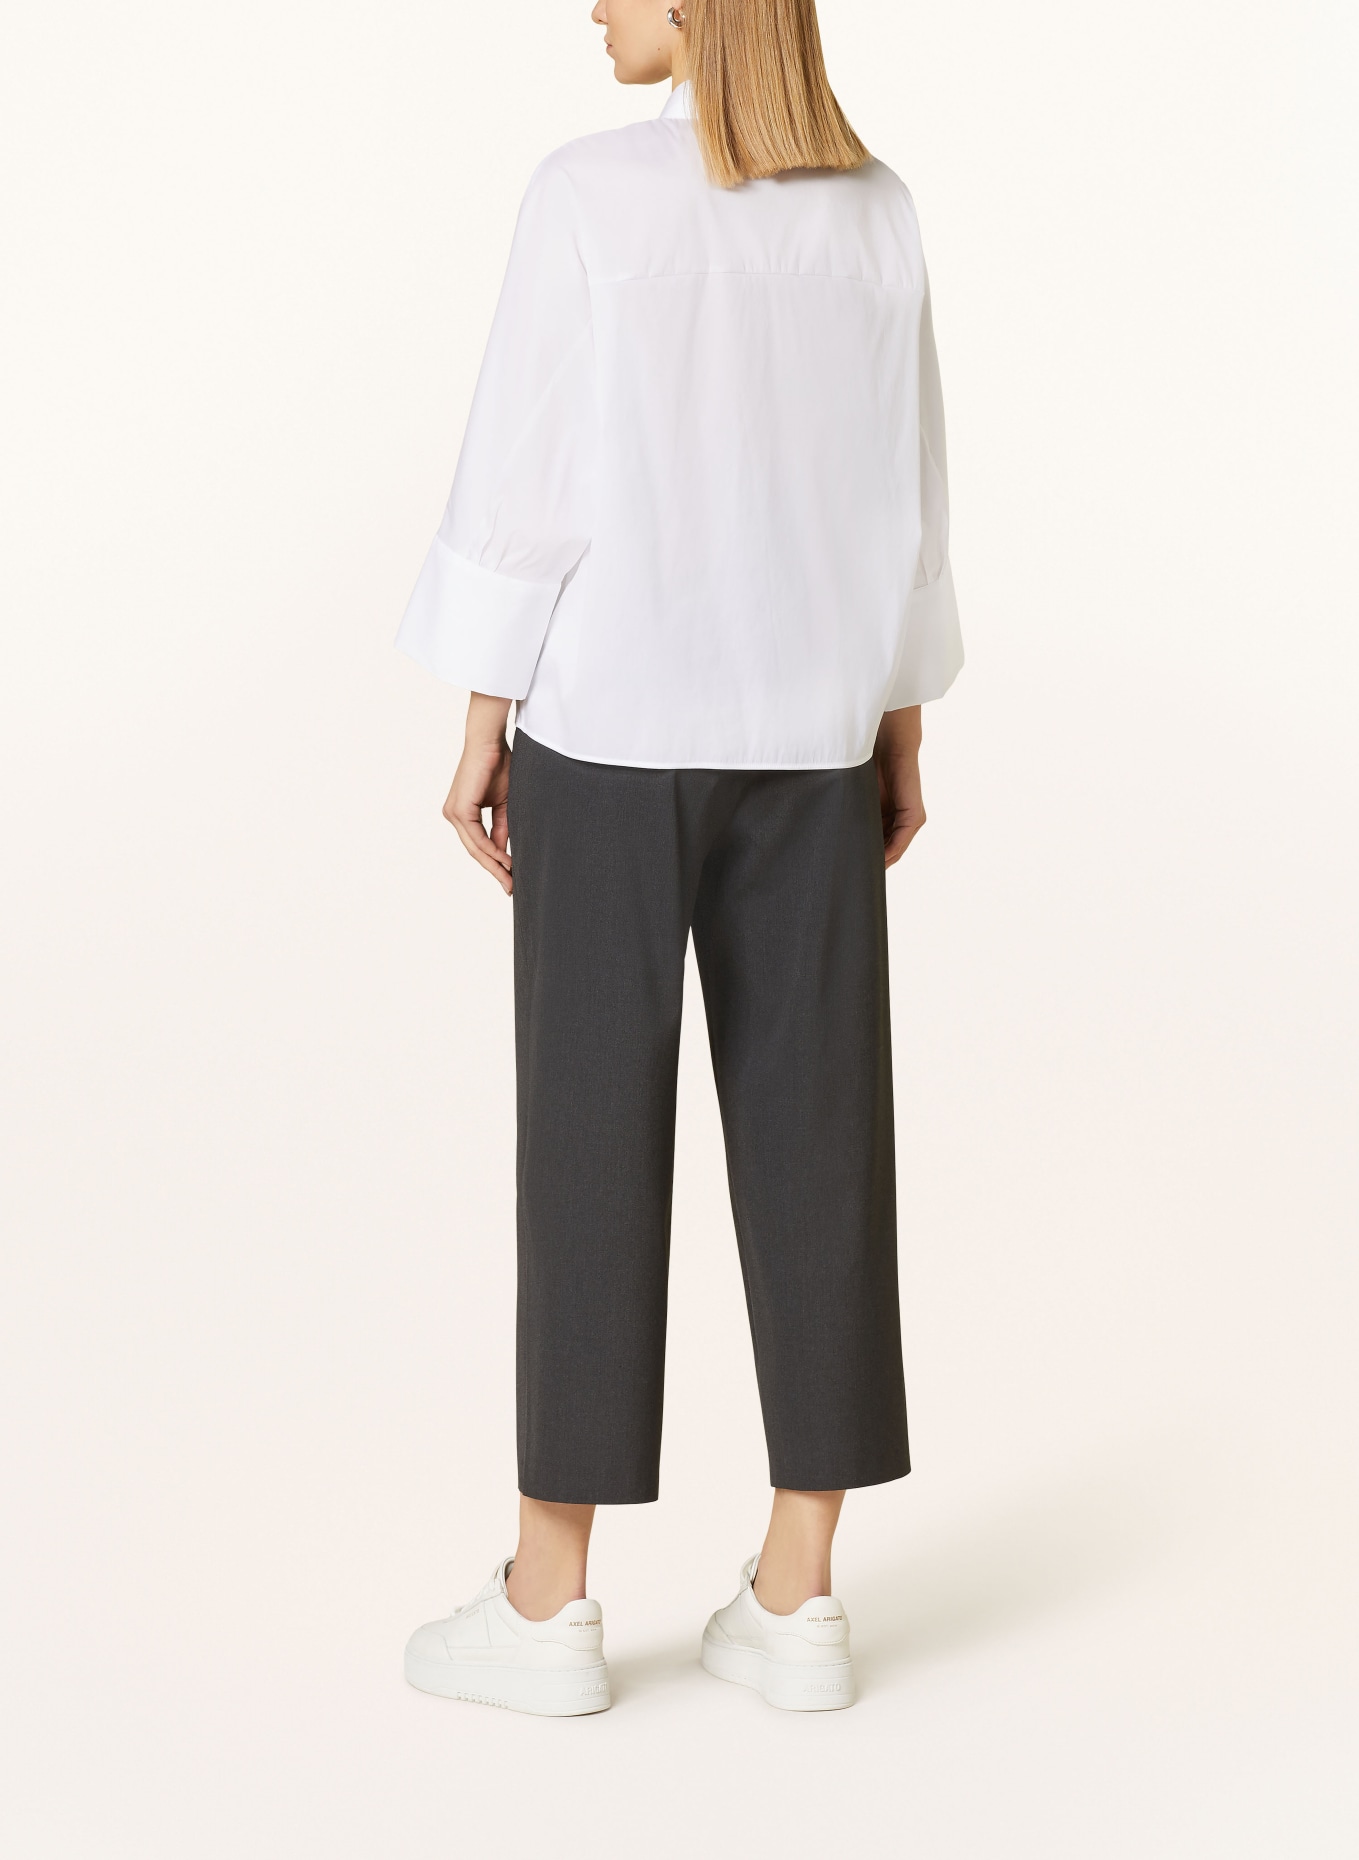 JOOP! Shirt blouse with 3/4 sleeves, Color: WHITE (Image 3)